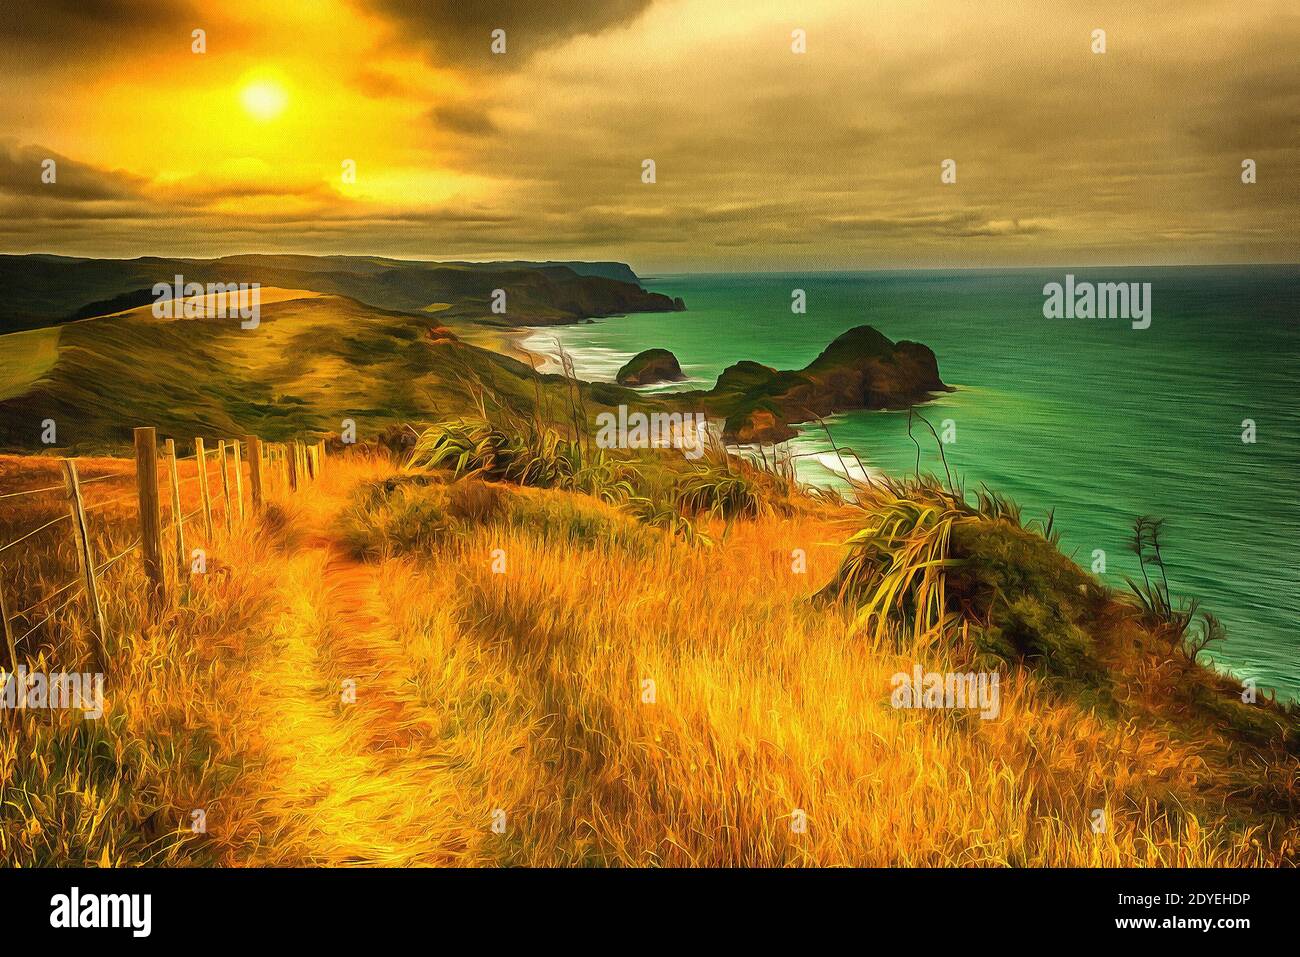 Golden glow of sunset on a grassy hill next to the ocean Stock Photo